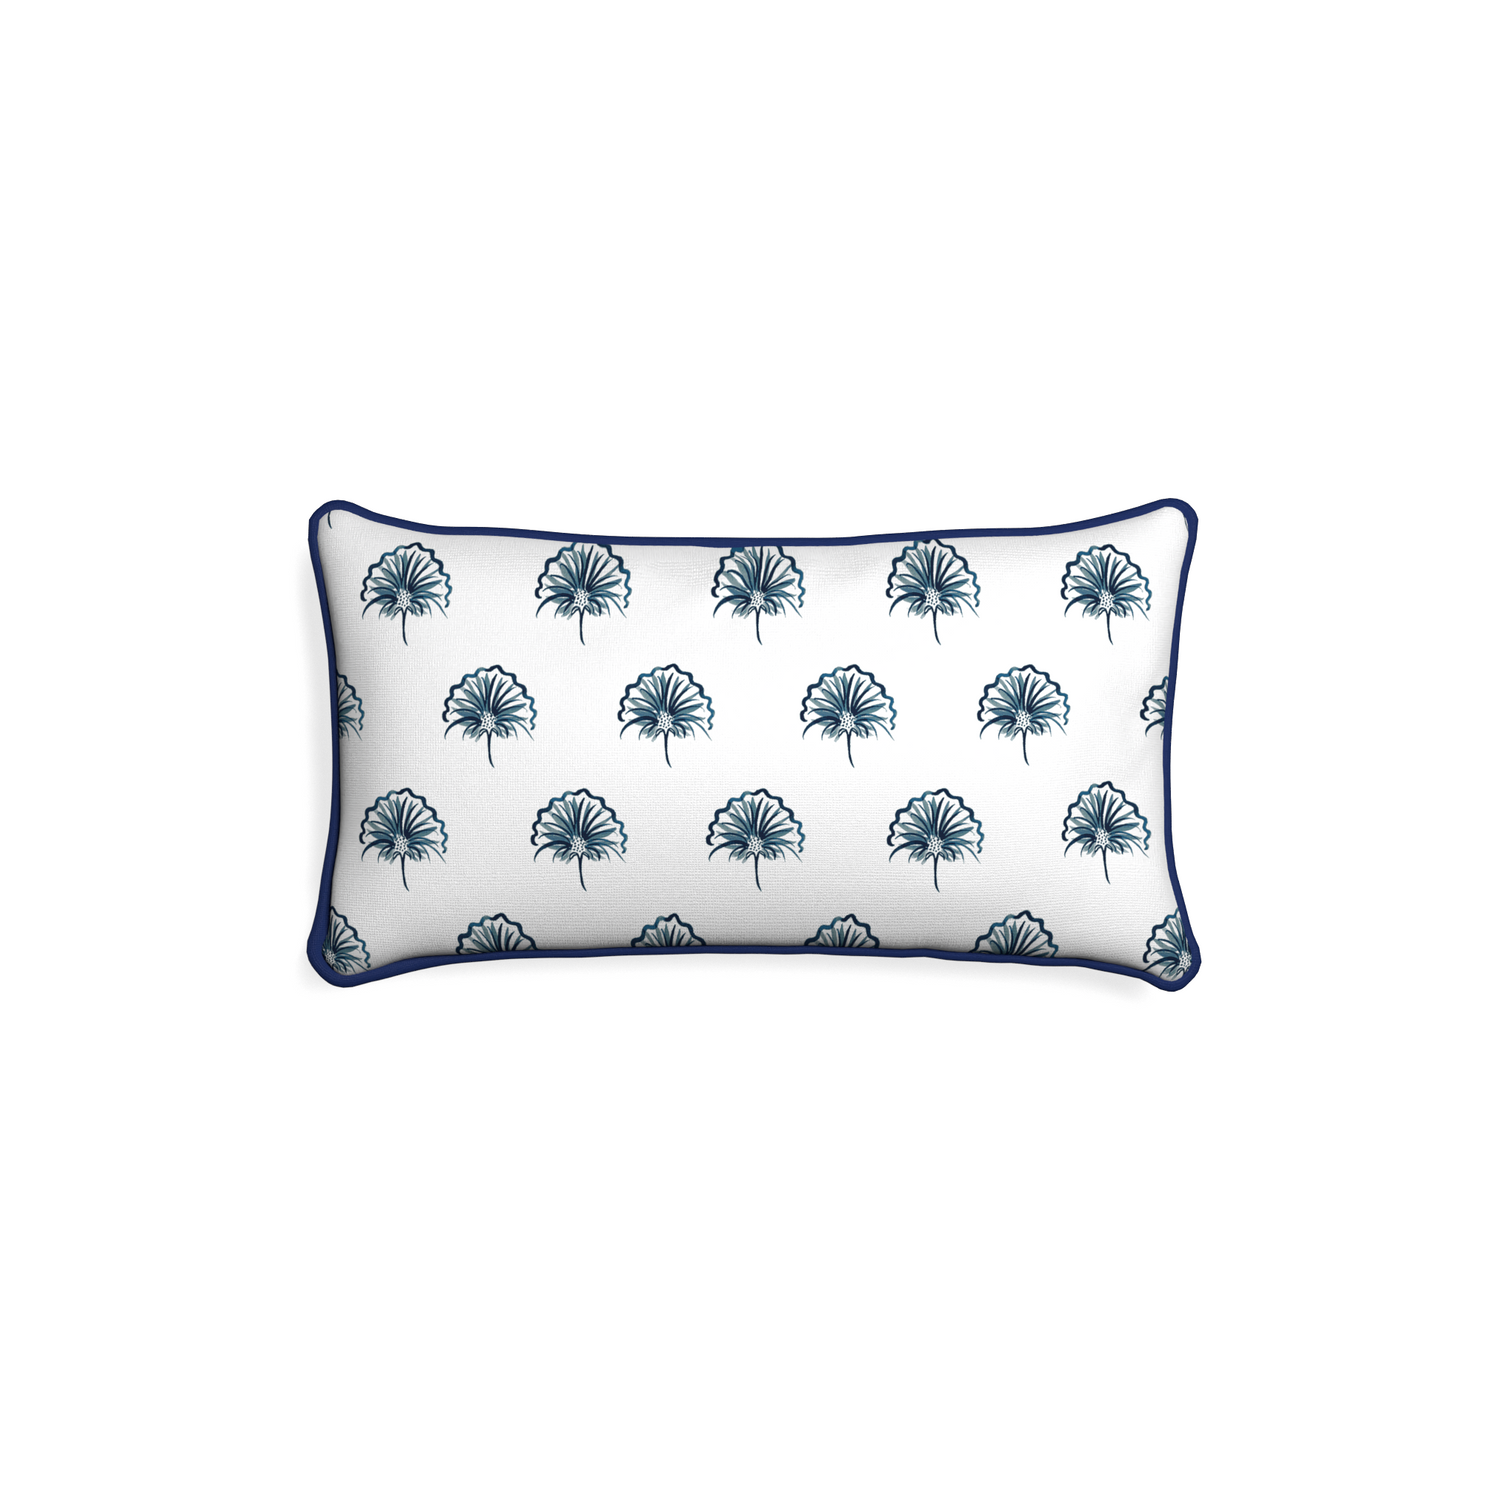 Petite-lumbar penelope midnight custom floral navypillow with midnight piping on white background